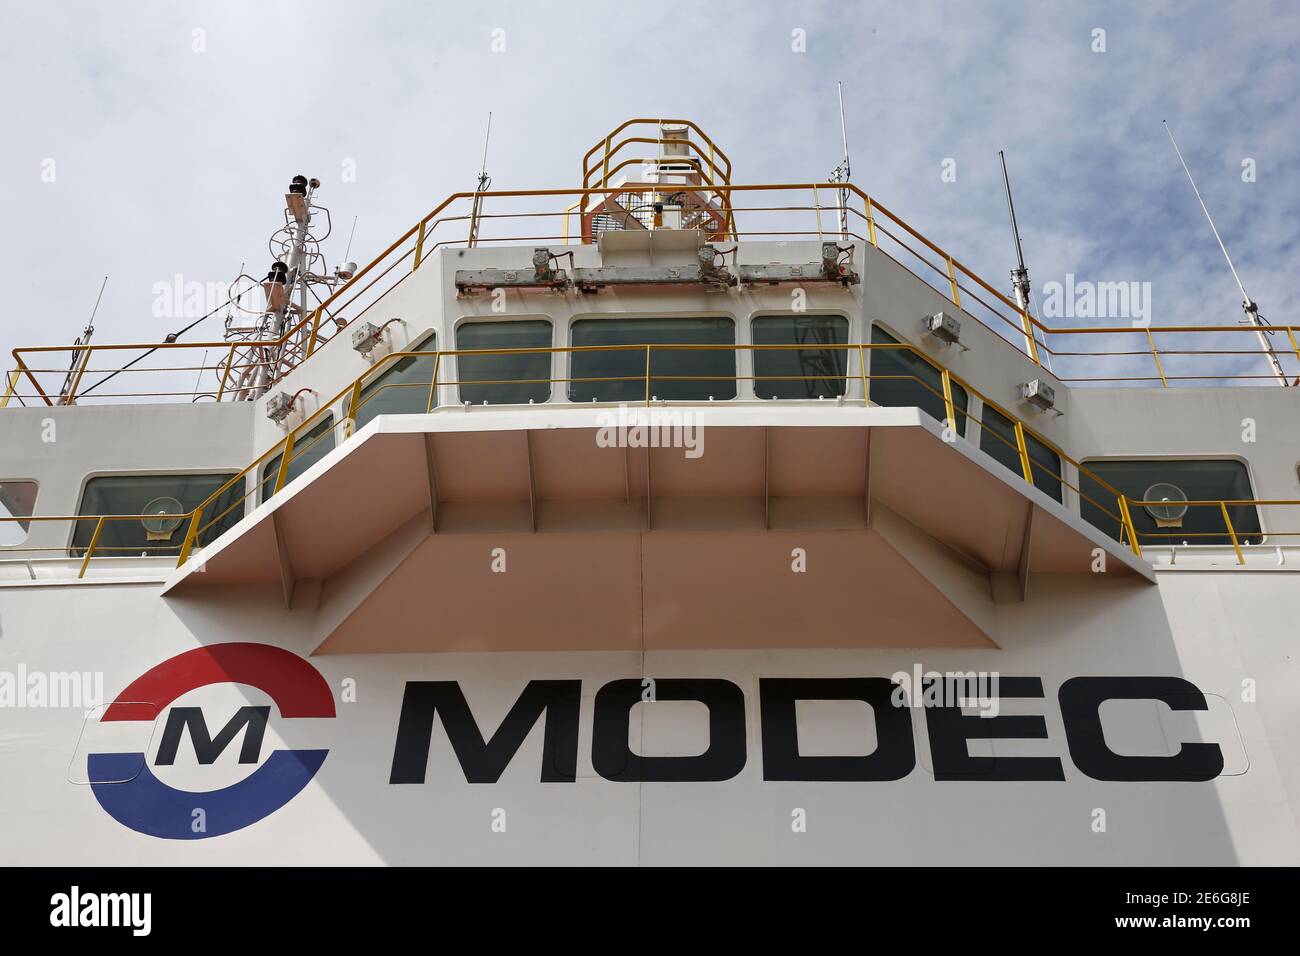 A Modec logo is pictured onboard Tullow Oil's newly completed Floating Production, Storage and Offloading vessel (FPSO) Prof. John Evans Atta Mills at Sembcorp Marine's Jurong Shipyard in Singapore January 20, 2016. Amid one of the deepest oil price crashes in history, Britain's Tullow Oil is sending one of the world's biggest floating deep-water oil production platforms to West Africa to pump crude for at least 20 years. Picture taken January 20, 2016.   REUTERS/Edgar Su Stock Photo